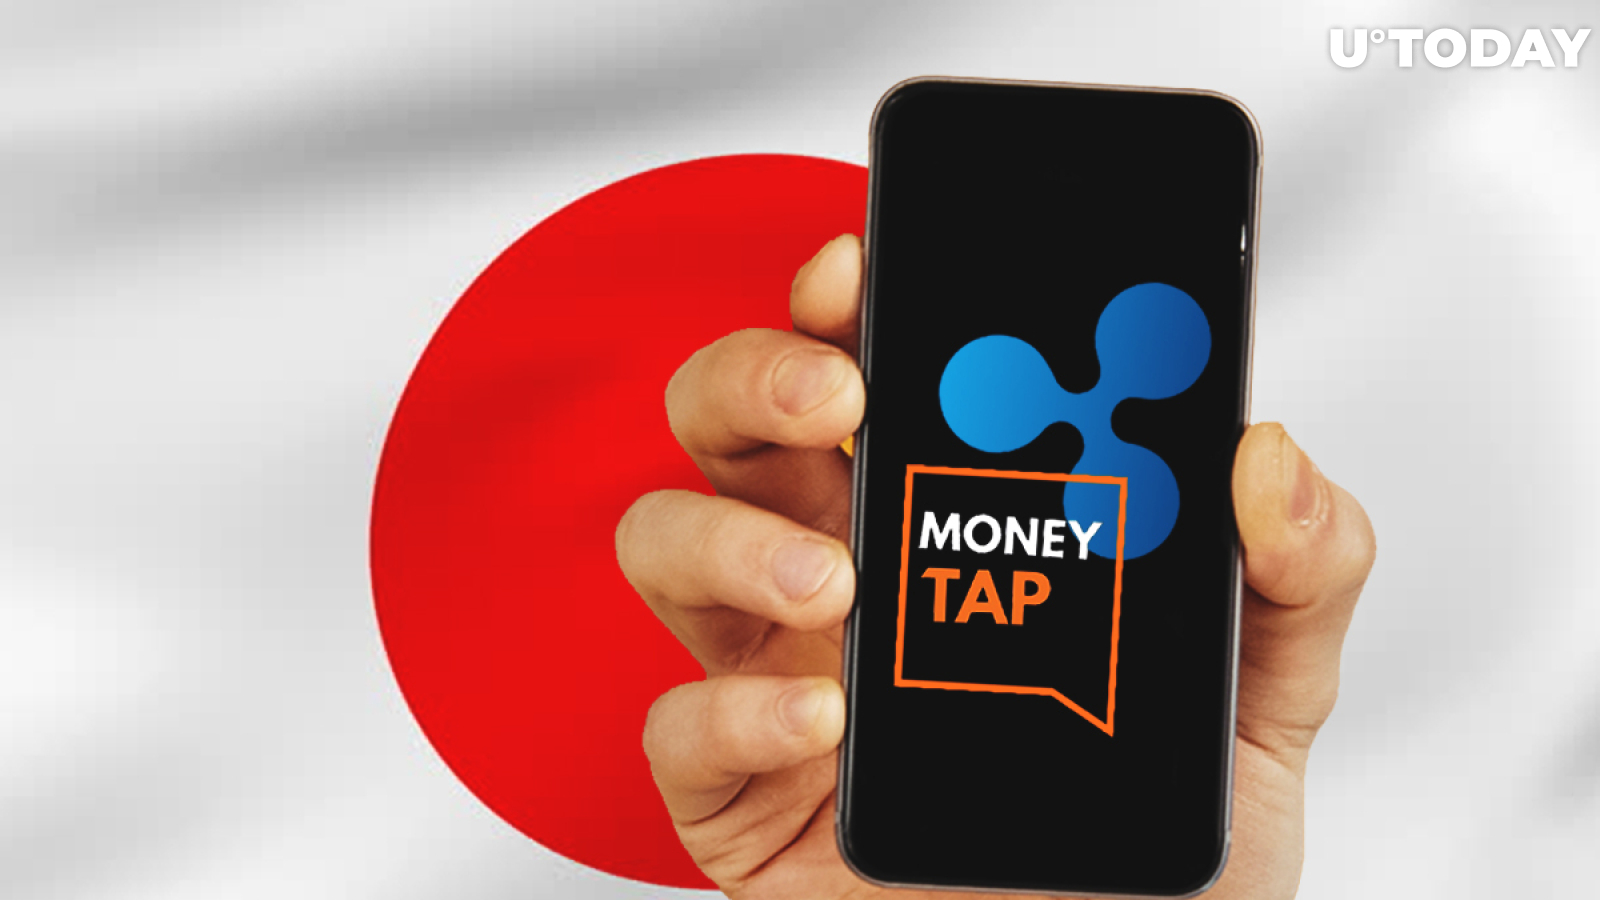 Ripple-Powered MoneyTap to Be Integrated by Major Japanese Bank